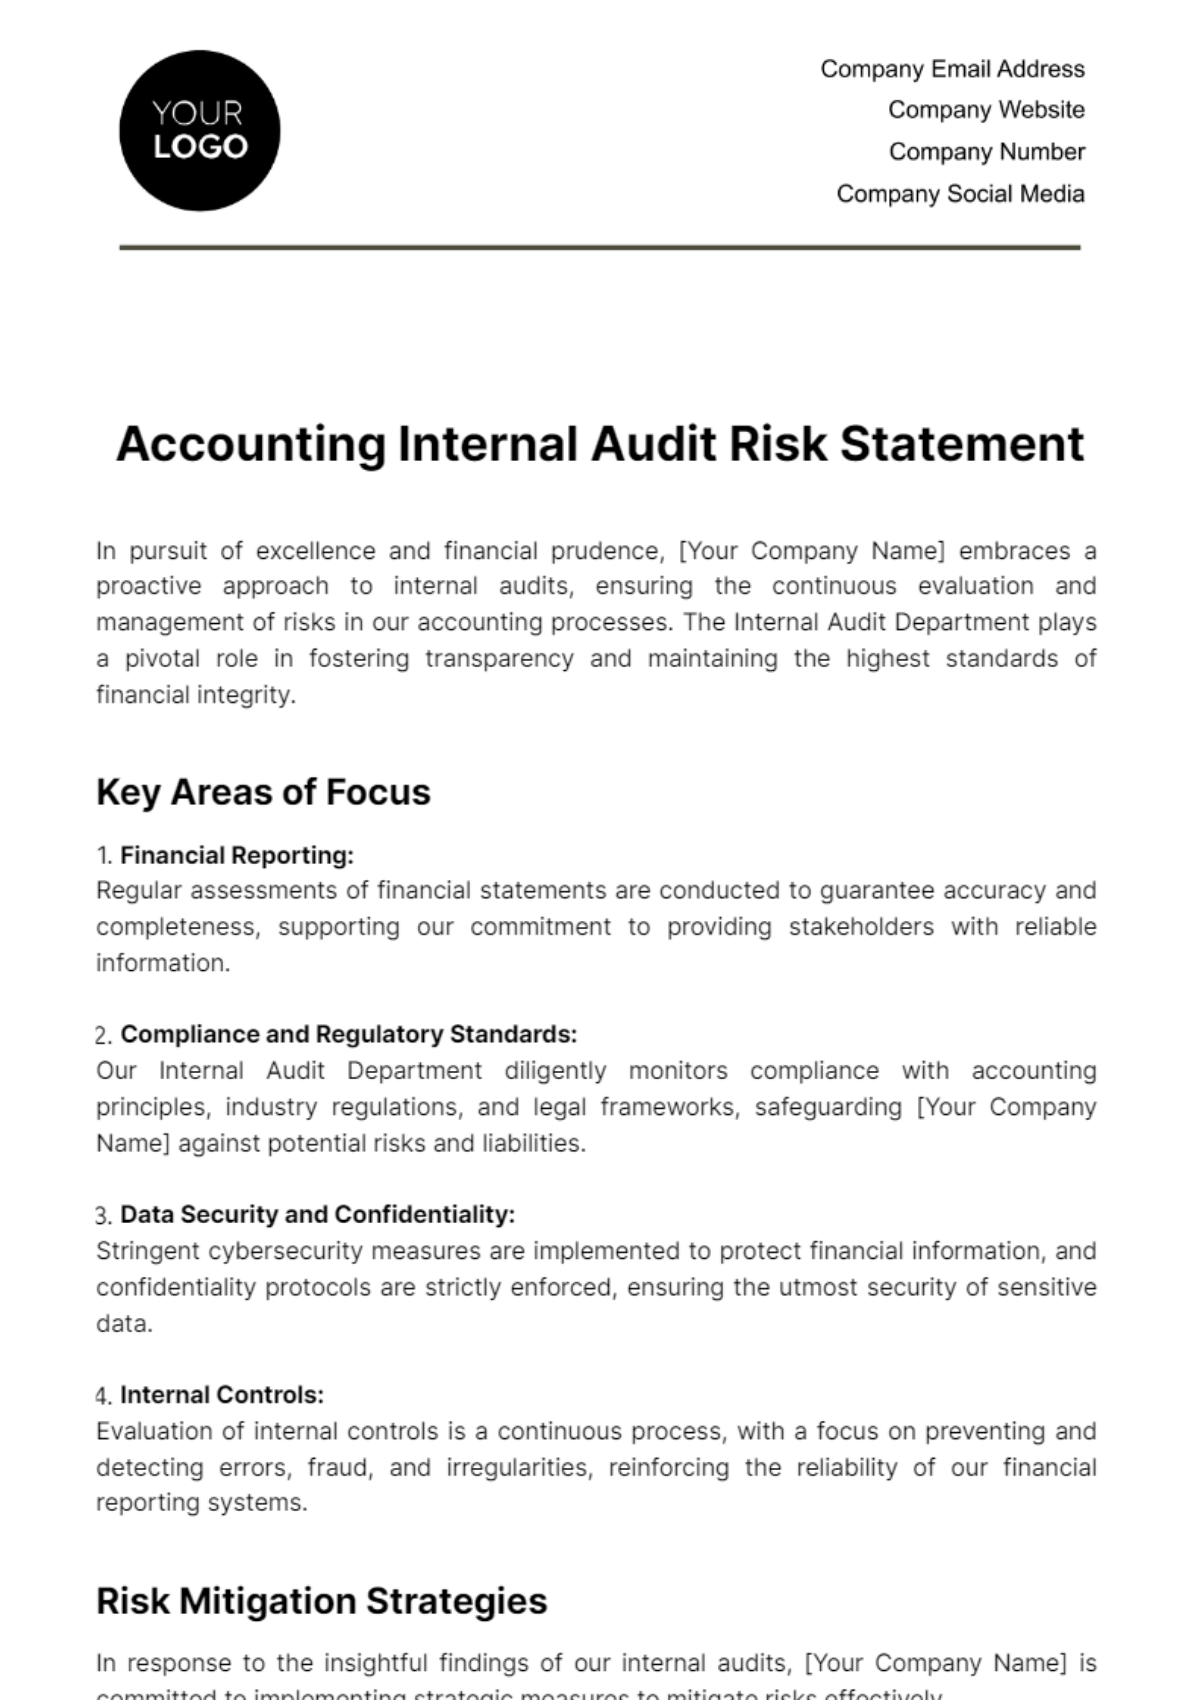 Accounting Internal Audit Risk Statement Template